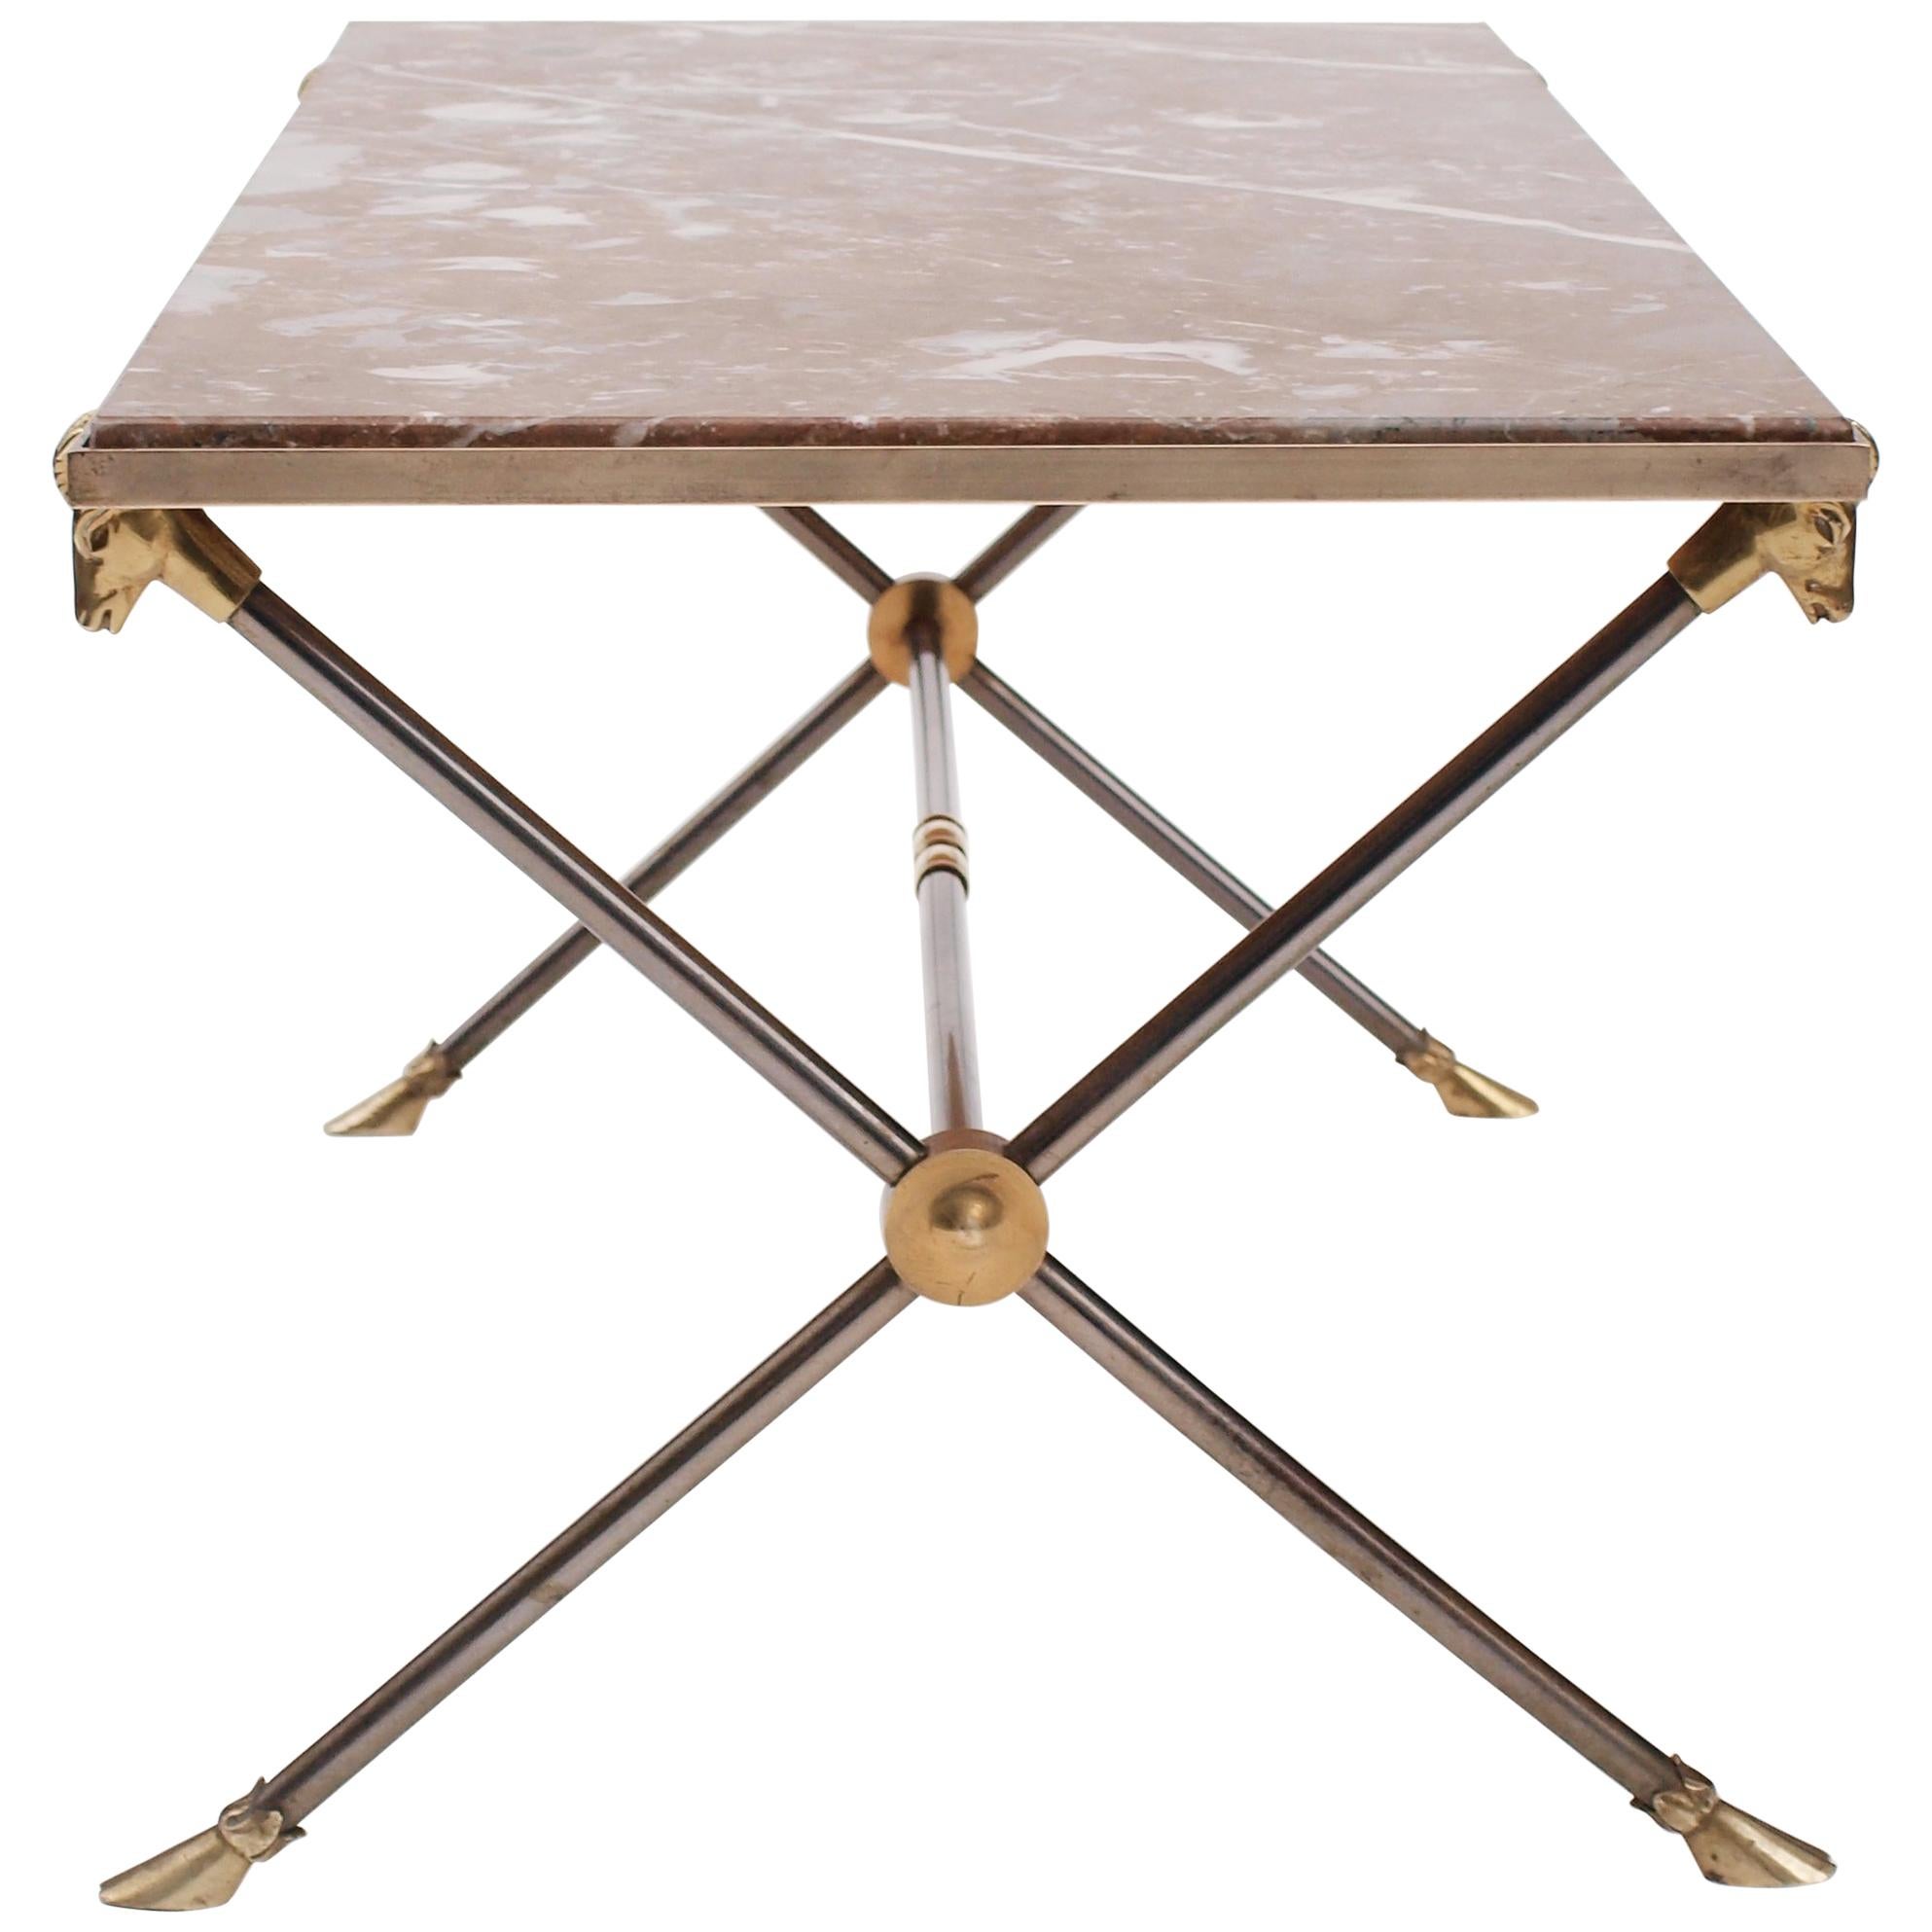 Maison Ramsay Brass, Nickel and Marble Coffee Table